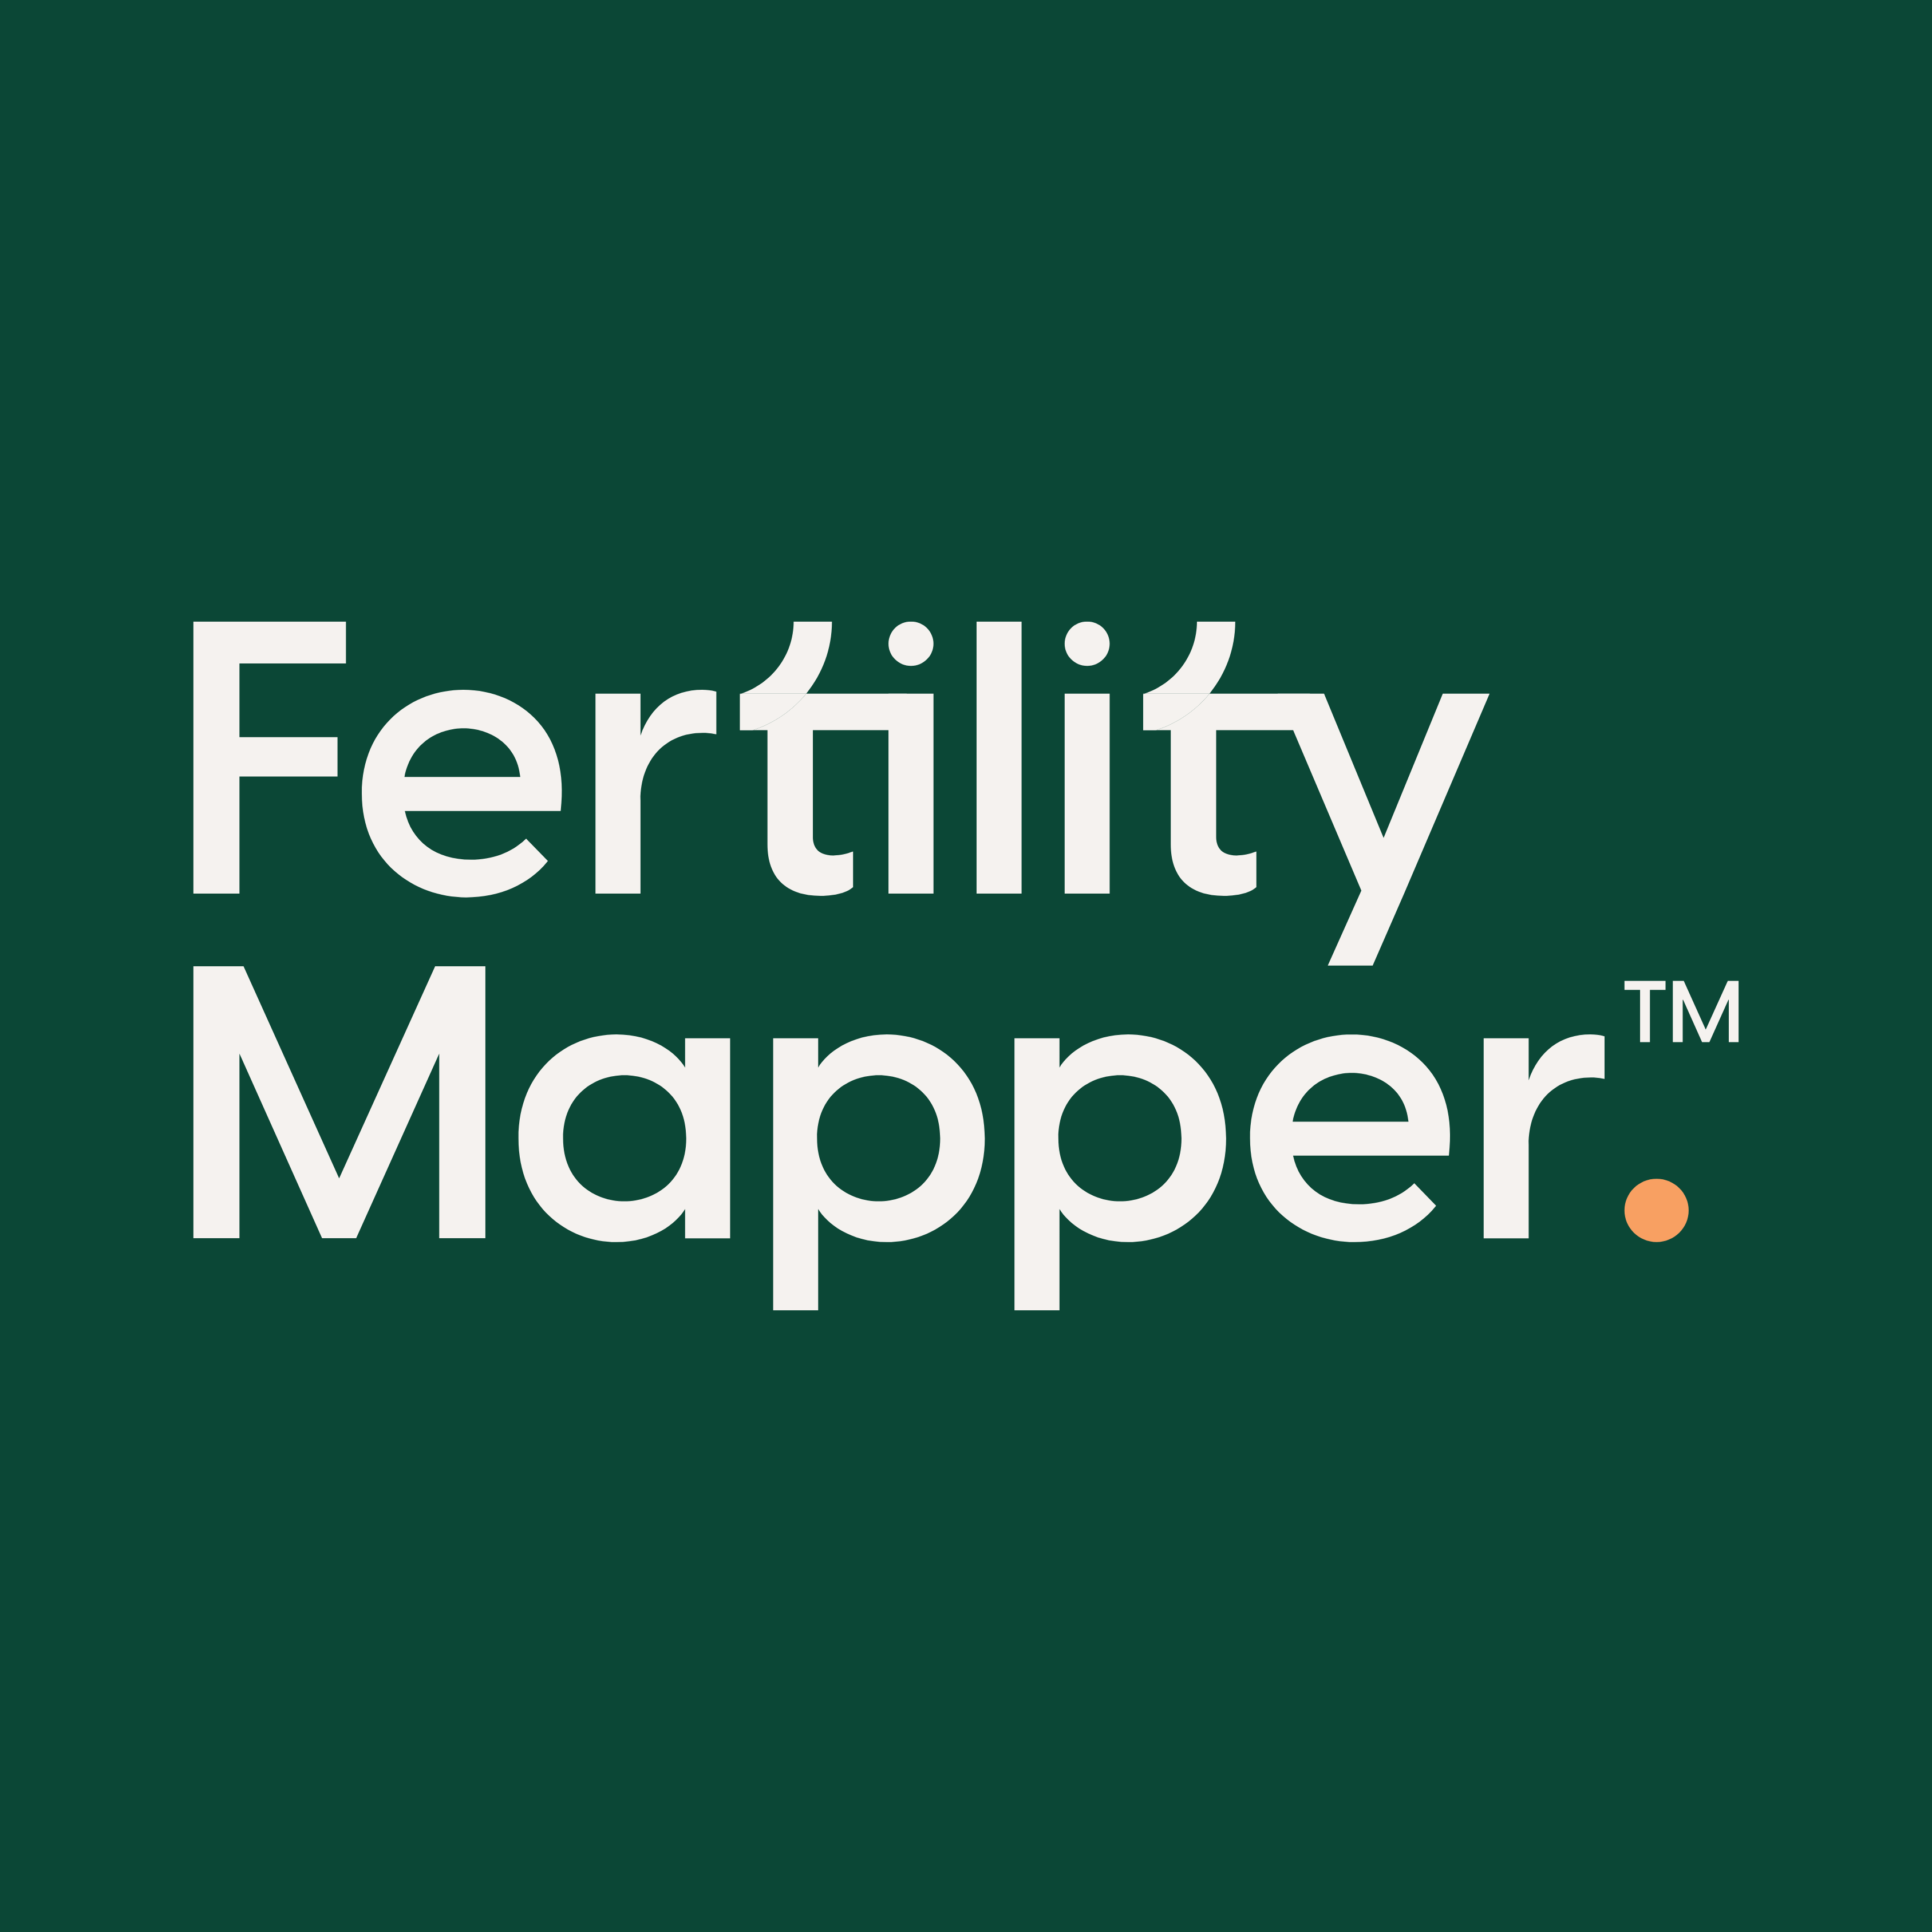 Fertility Mapper | Our stories change everything.